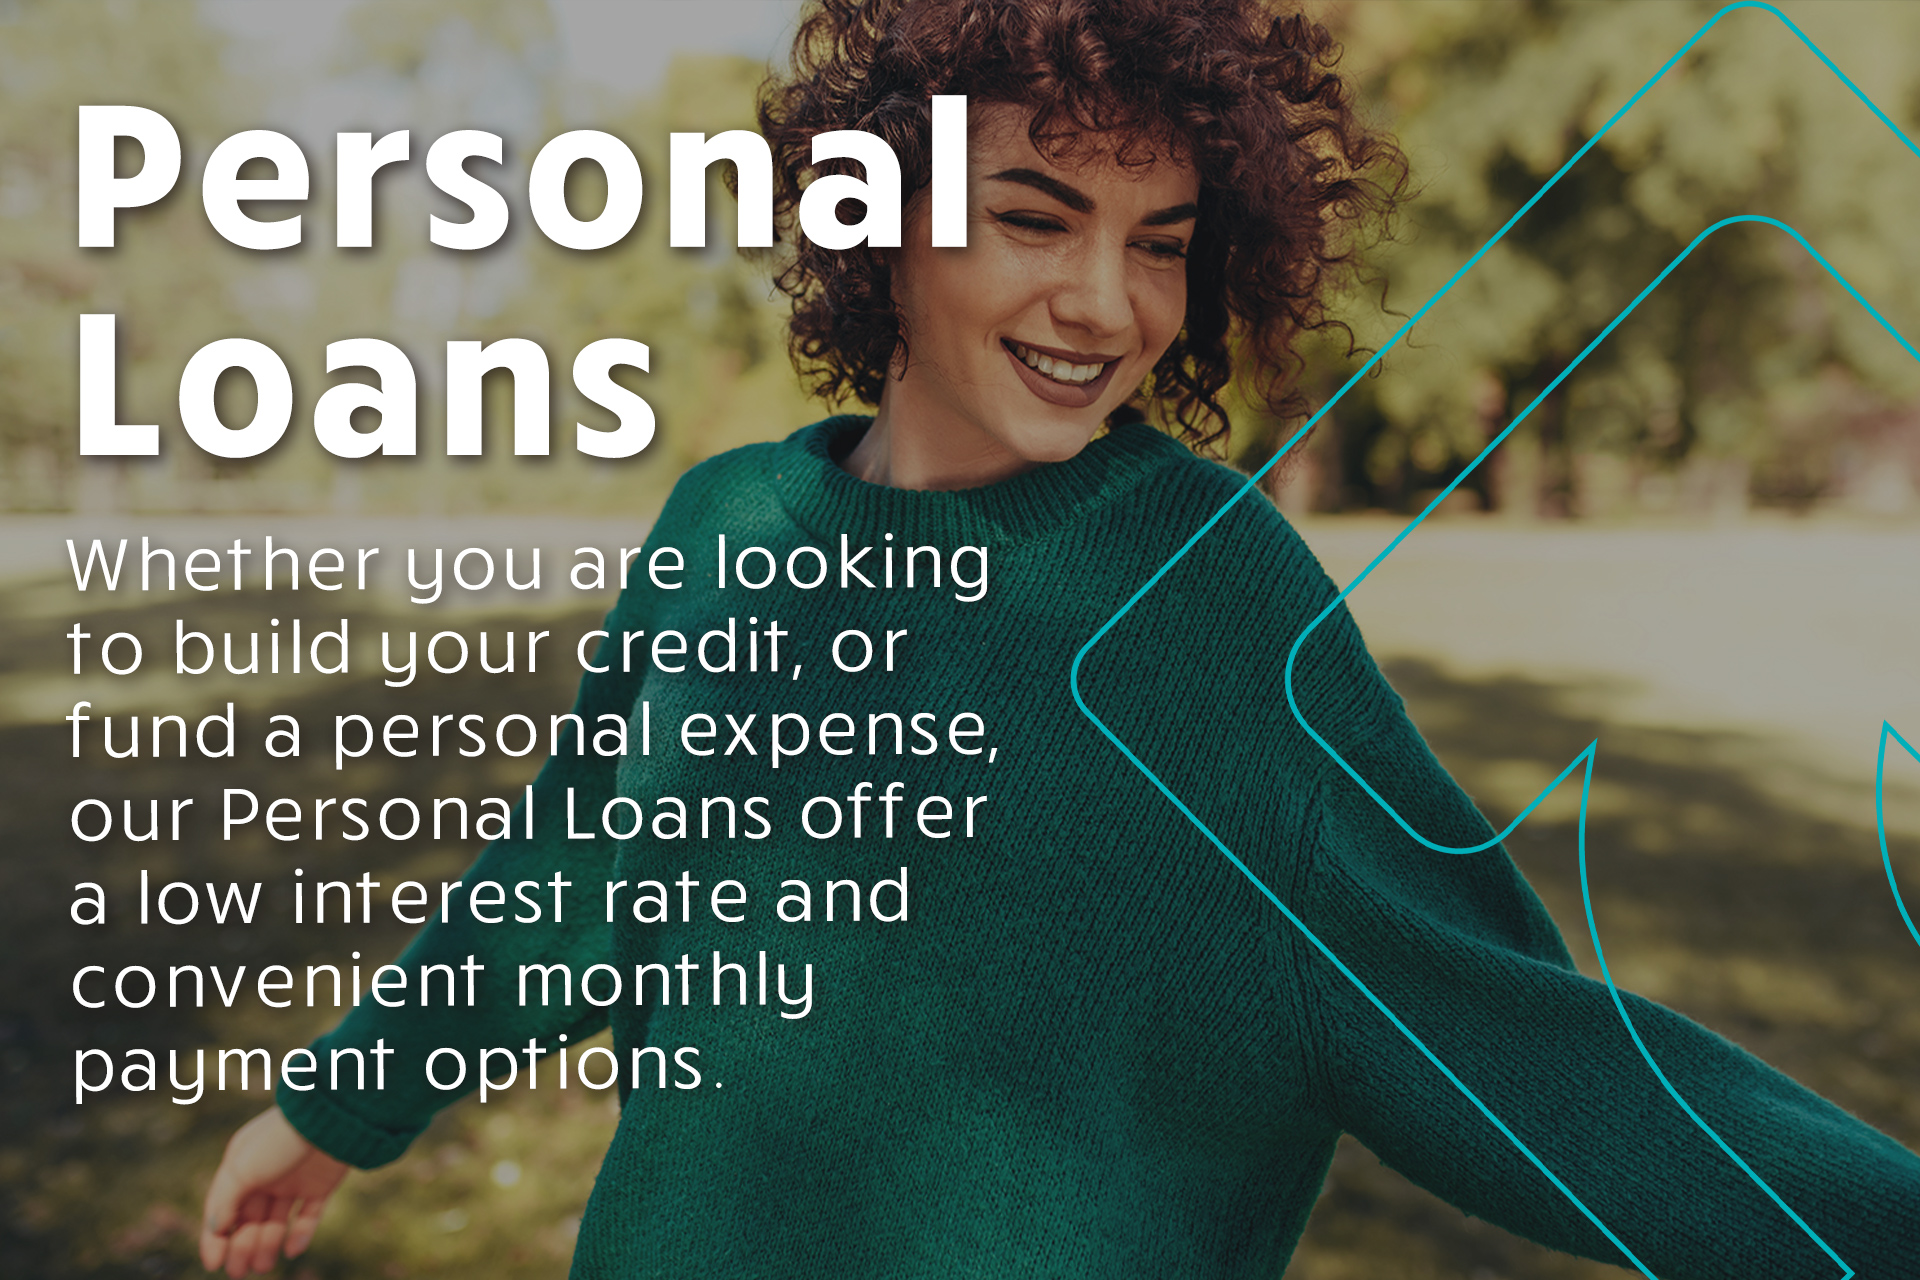 Whether you are looking to build your credit, or fund a personal expense, our Personal Loans offer a low interest rate and convenient monthly payment options.